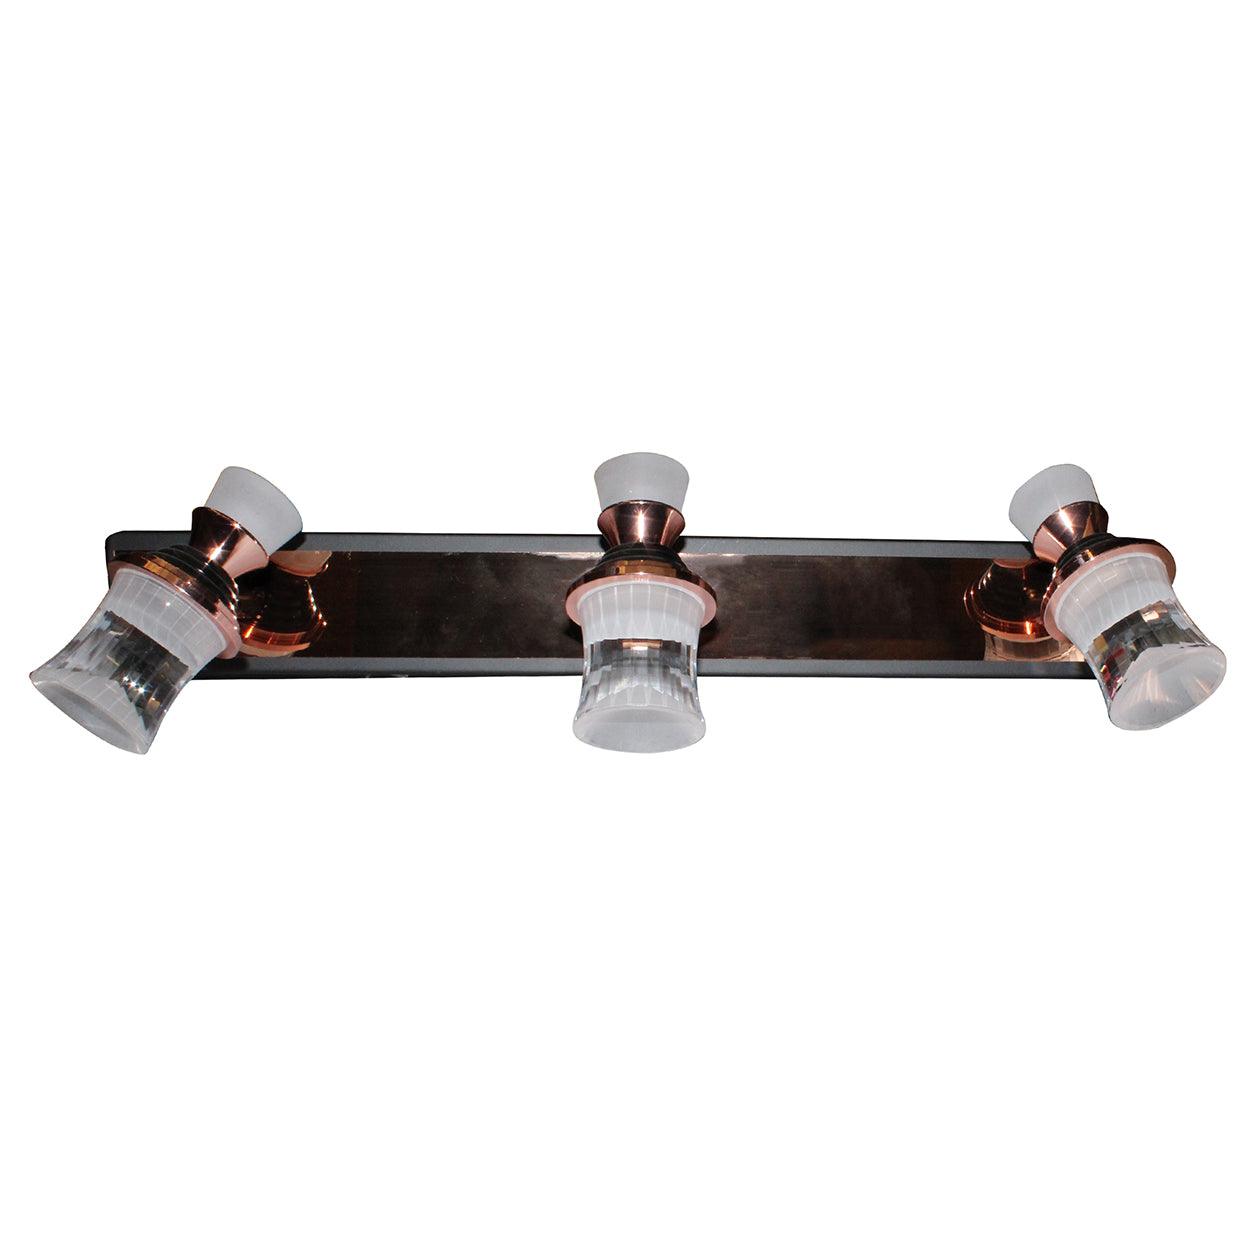 ANKUR COPPER HAT WITH GLASS BUBBLE LED MIRROR PICTURE WALL LIGHT - Ankur Lighting